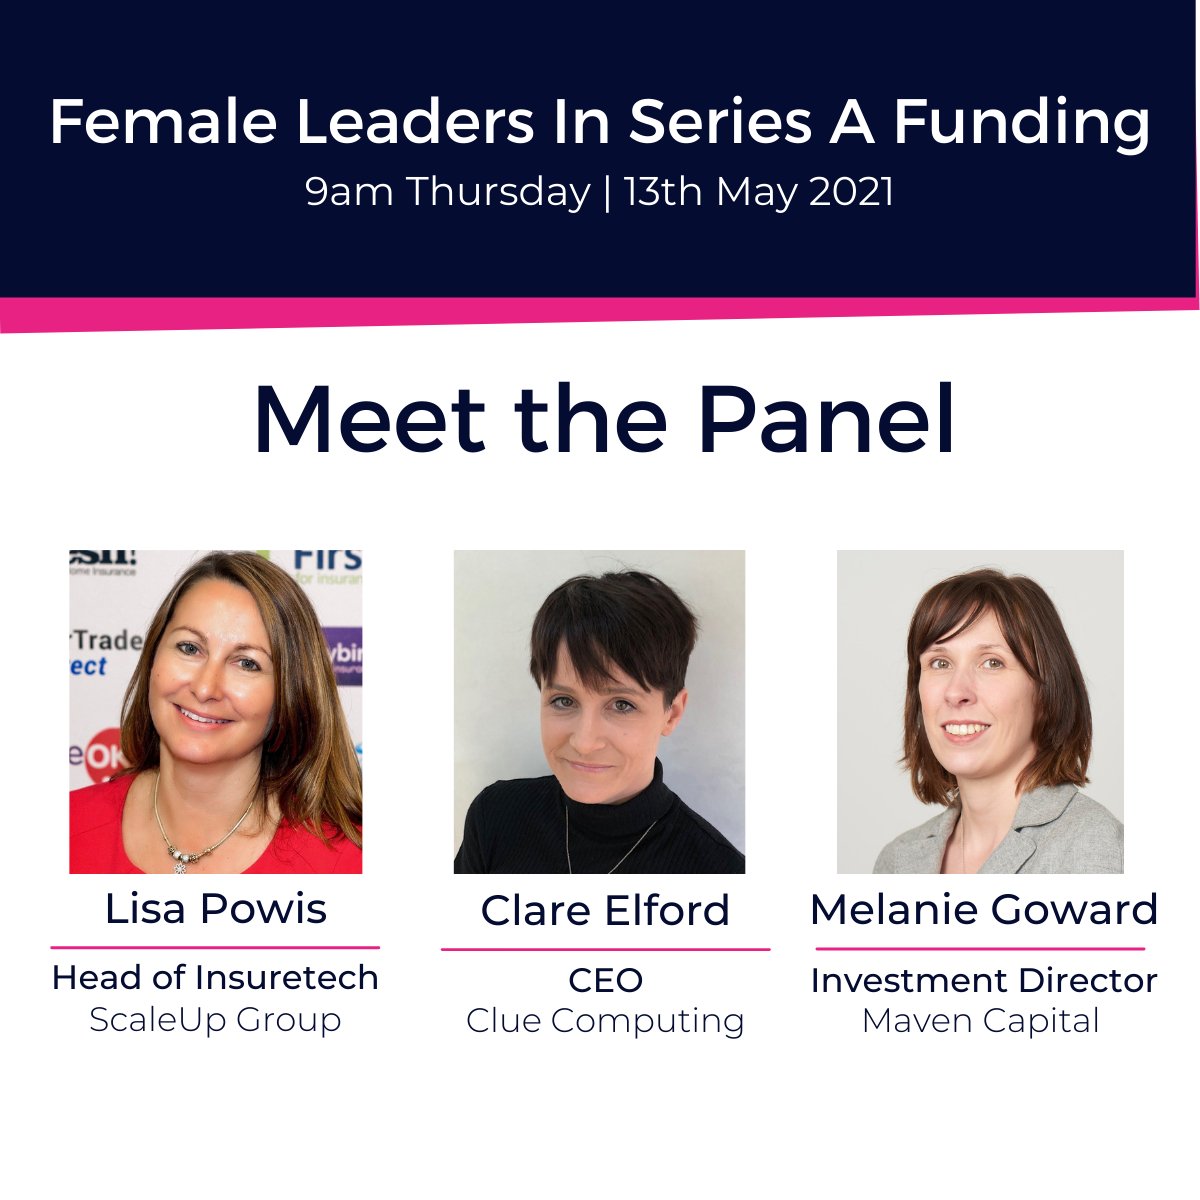 Join our distinguished panel as they share their journey and experience as #femaleleaders in the scaleup environment, also discussing the challenges and opportunities the pandemic has created in the #SeriesA landscape for female entrepreneurs. lnkd.in/dJSE4fc